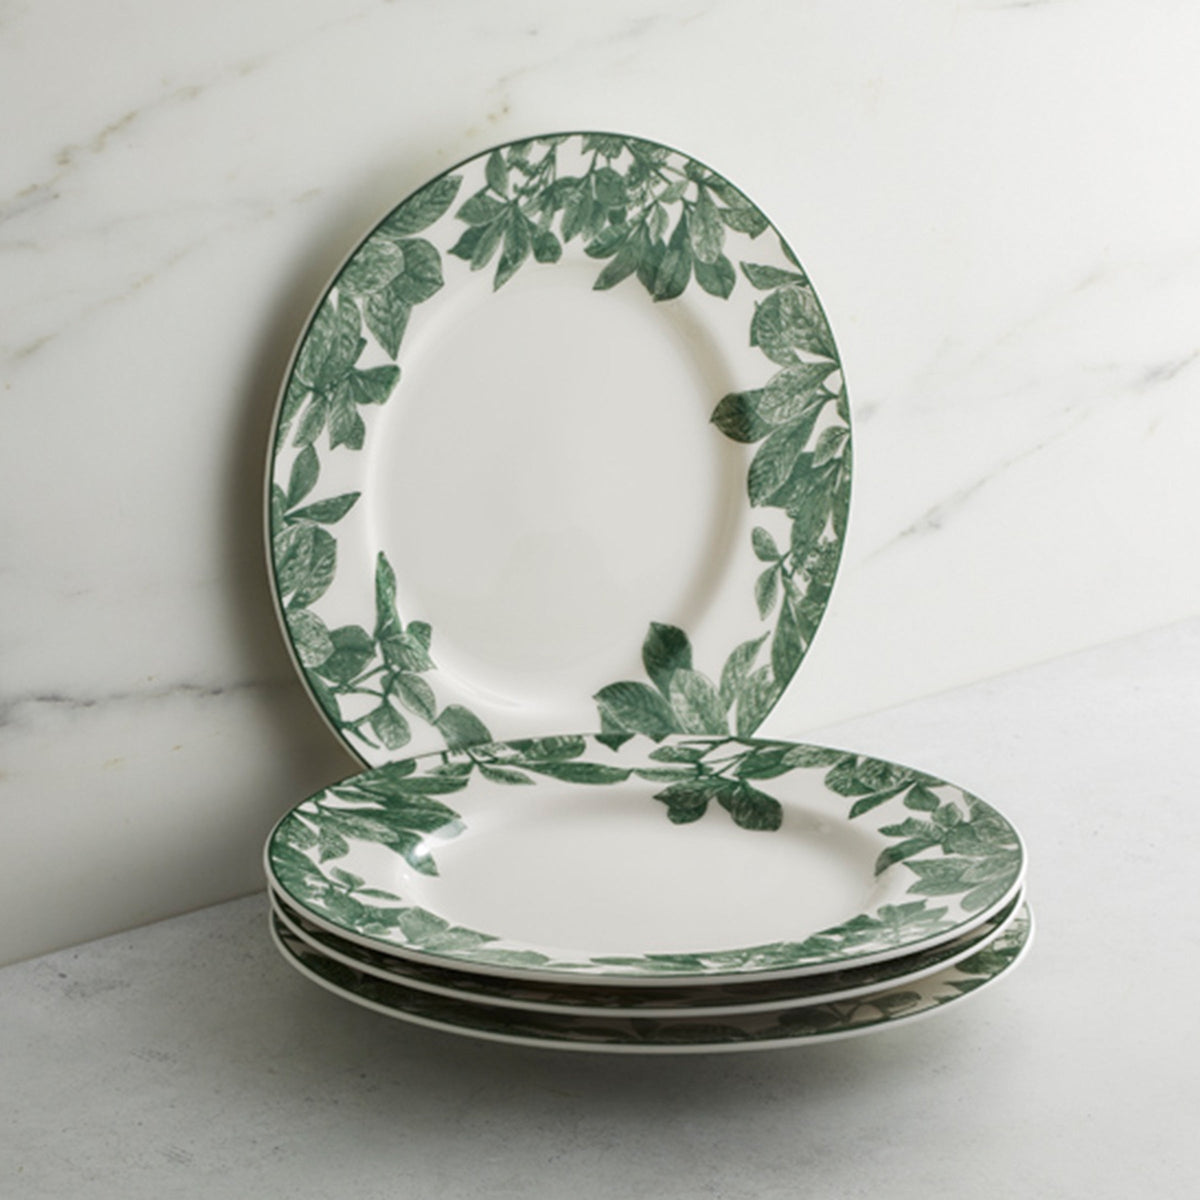 Three Caskata Arbor Green Rimmed Salad Plates are stacked neatly on a light-colored surface against a marble background.